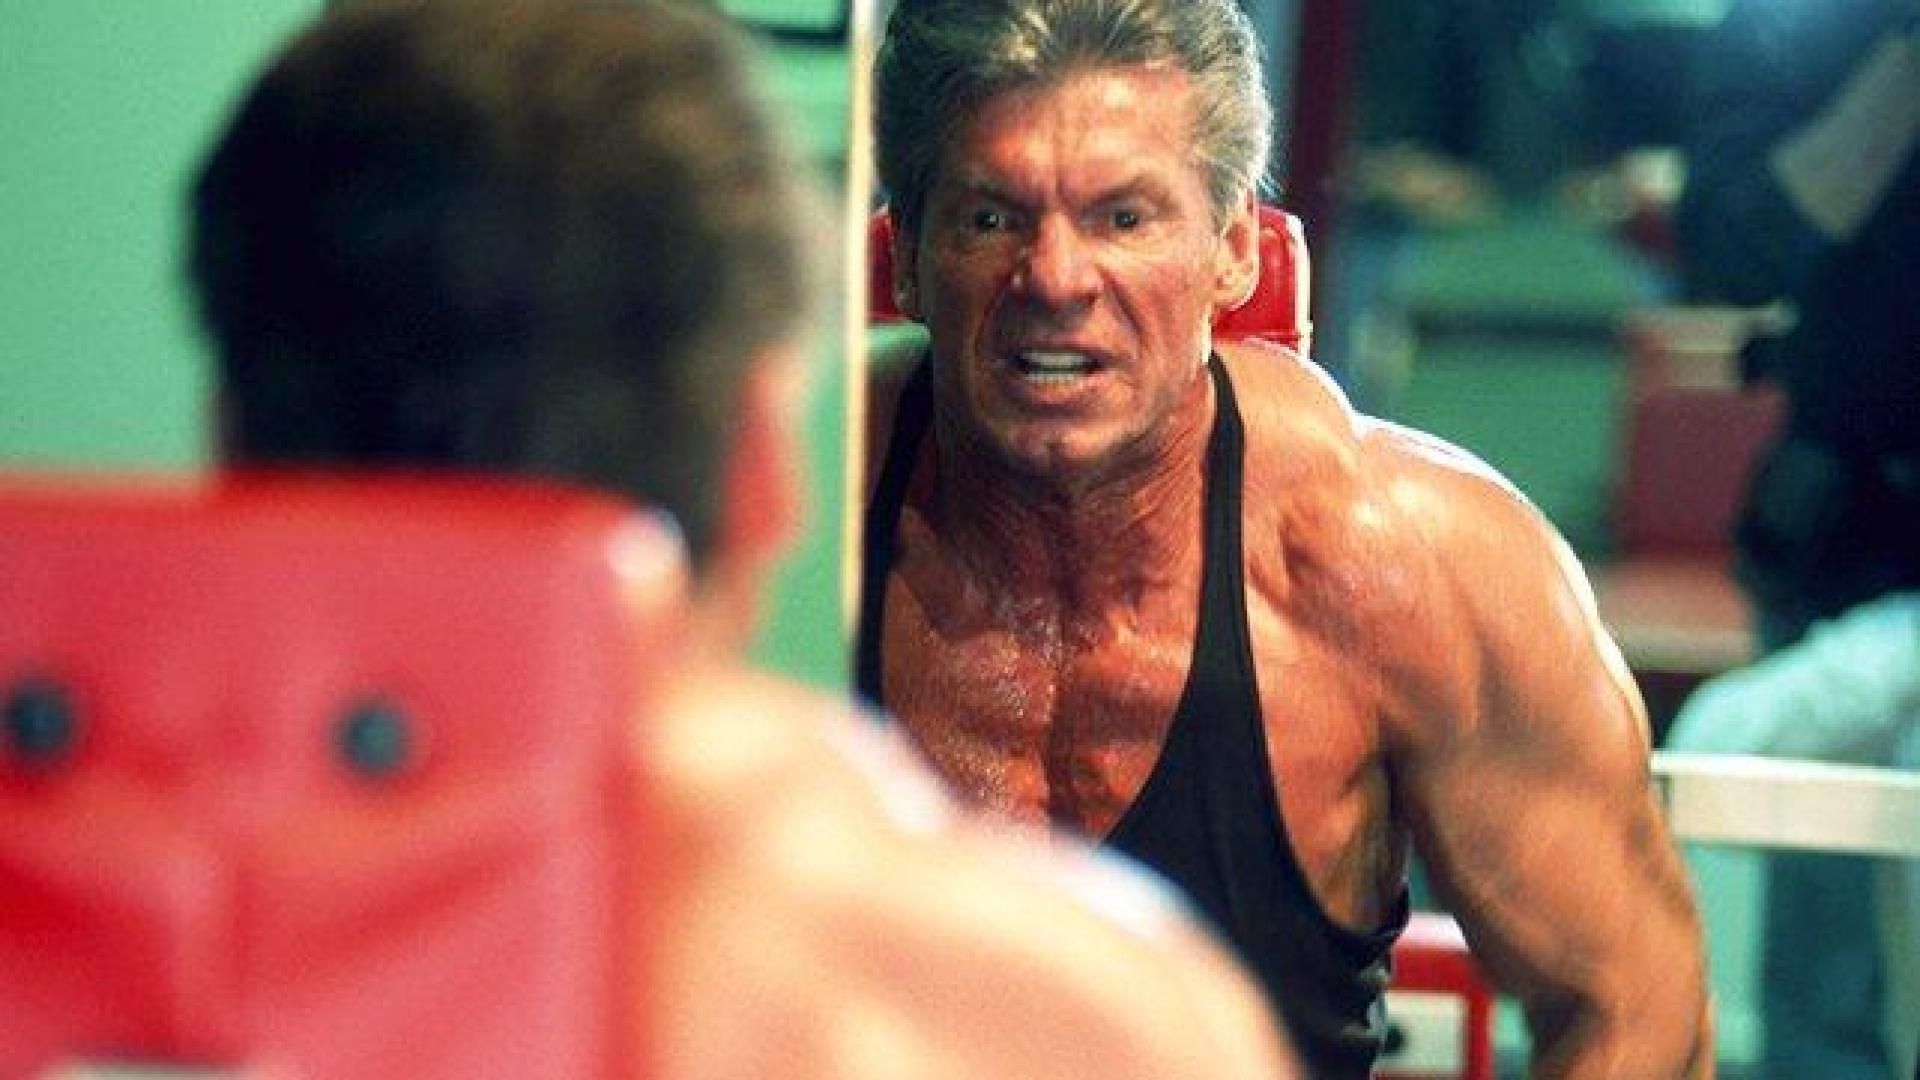 Former WWE Chairman &amp; CEO Vince McMahon shown in his training room. There were some interesting stories about Vince that not many people know about.